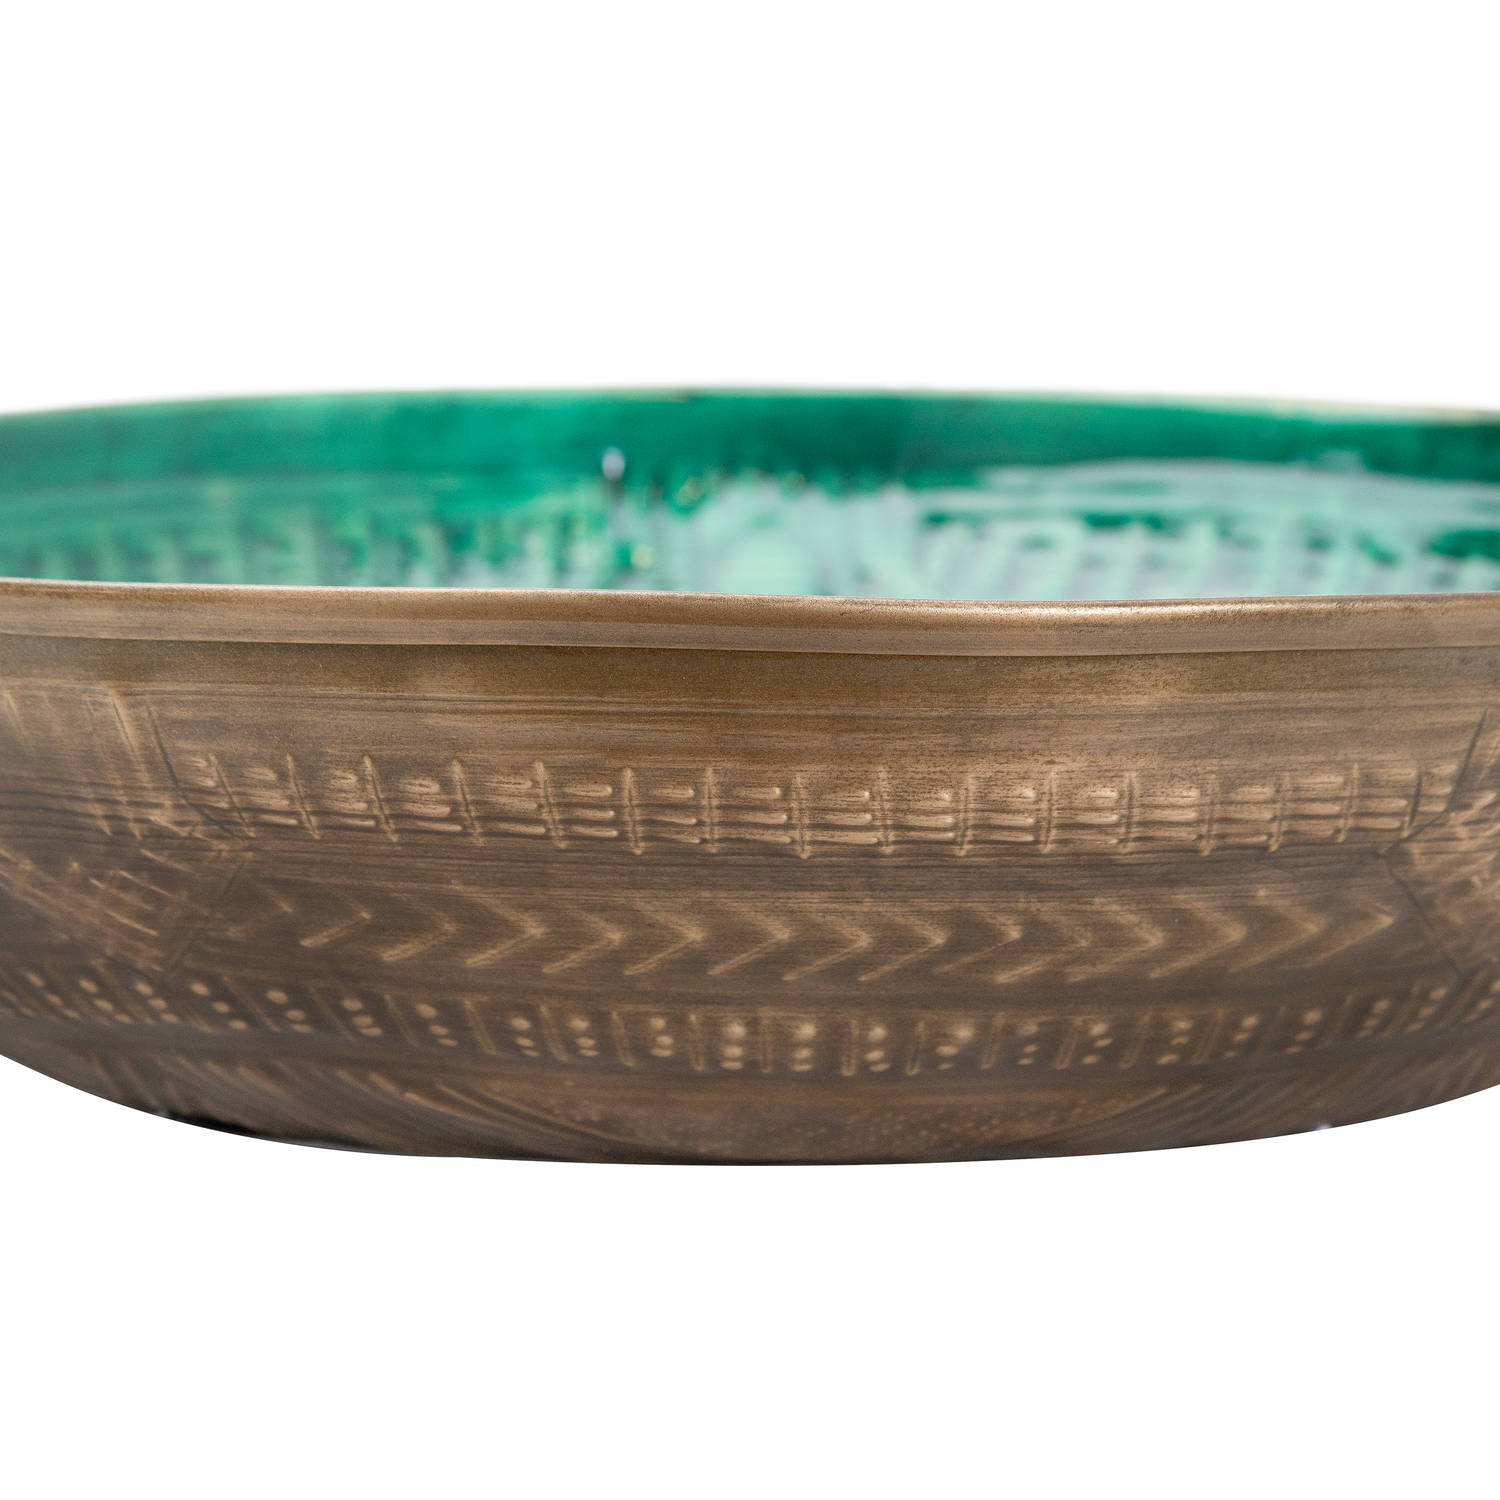 Aztec Collection Brass Embossed Ceramic Large Bowl - Image 2